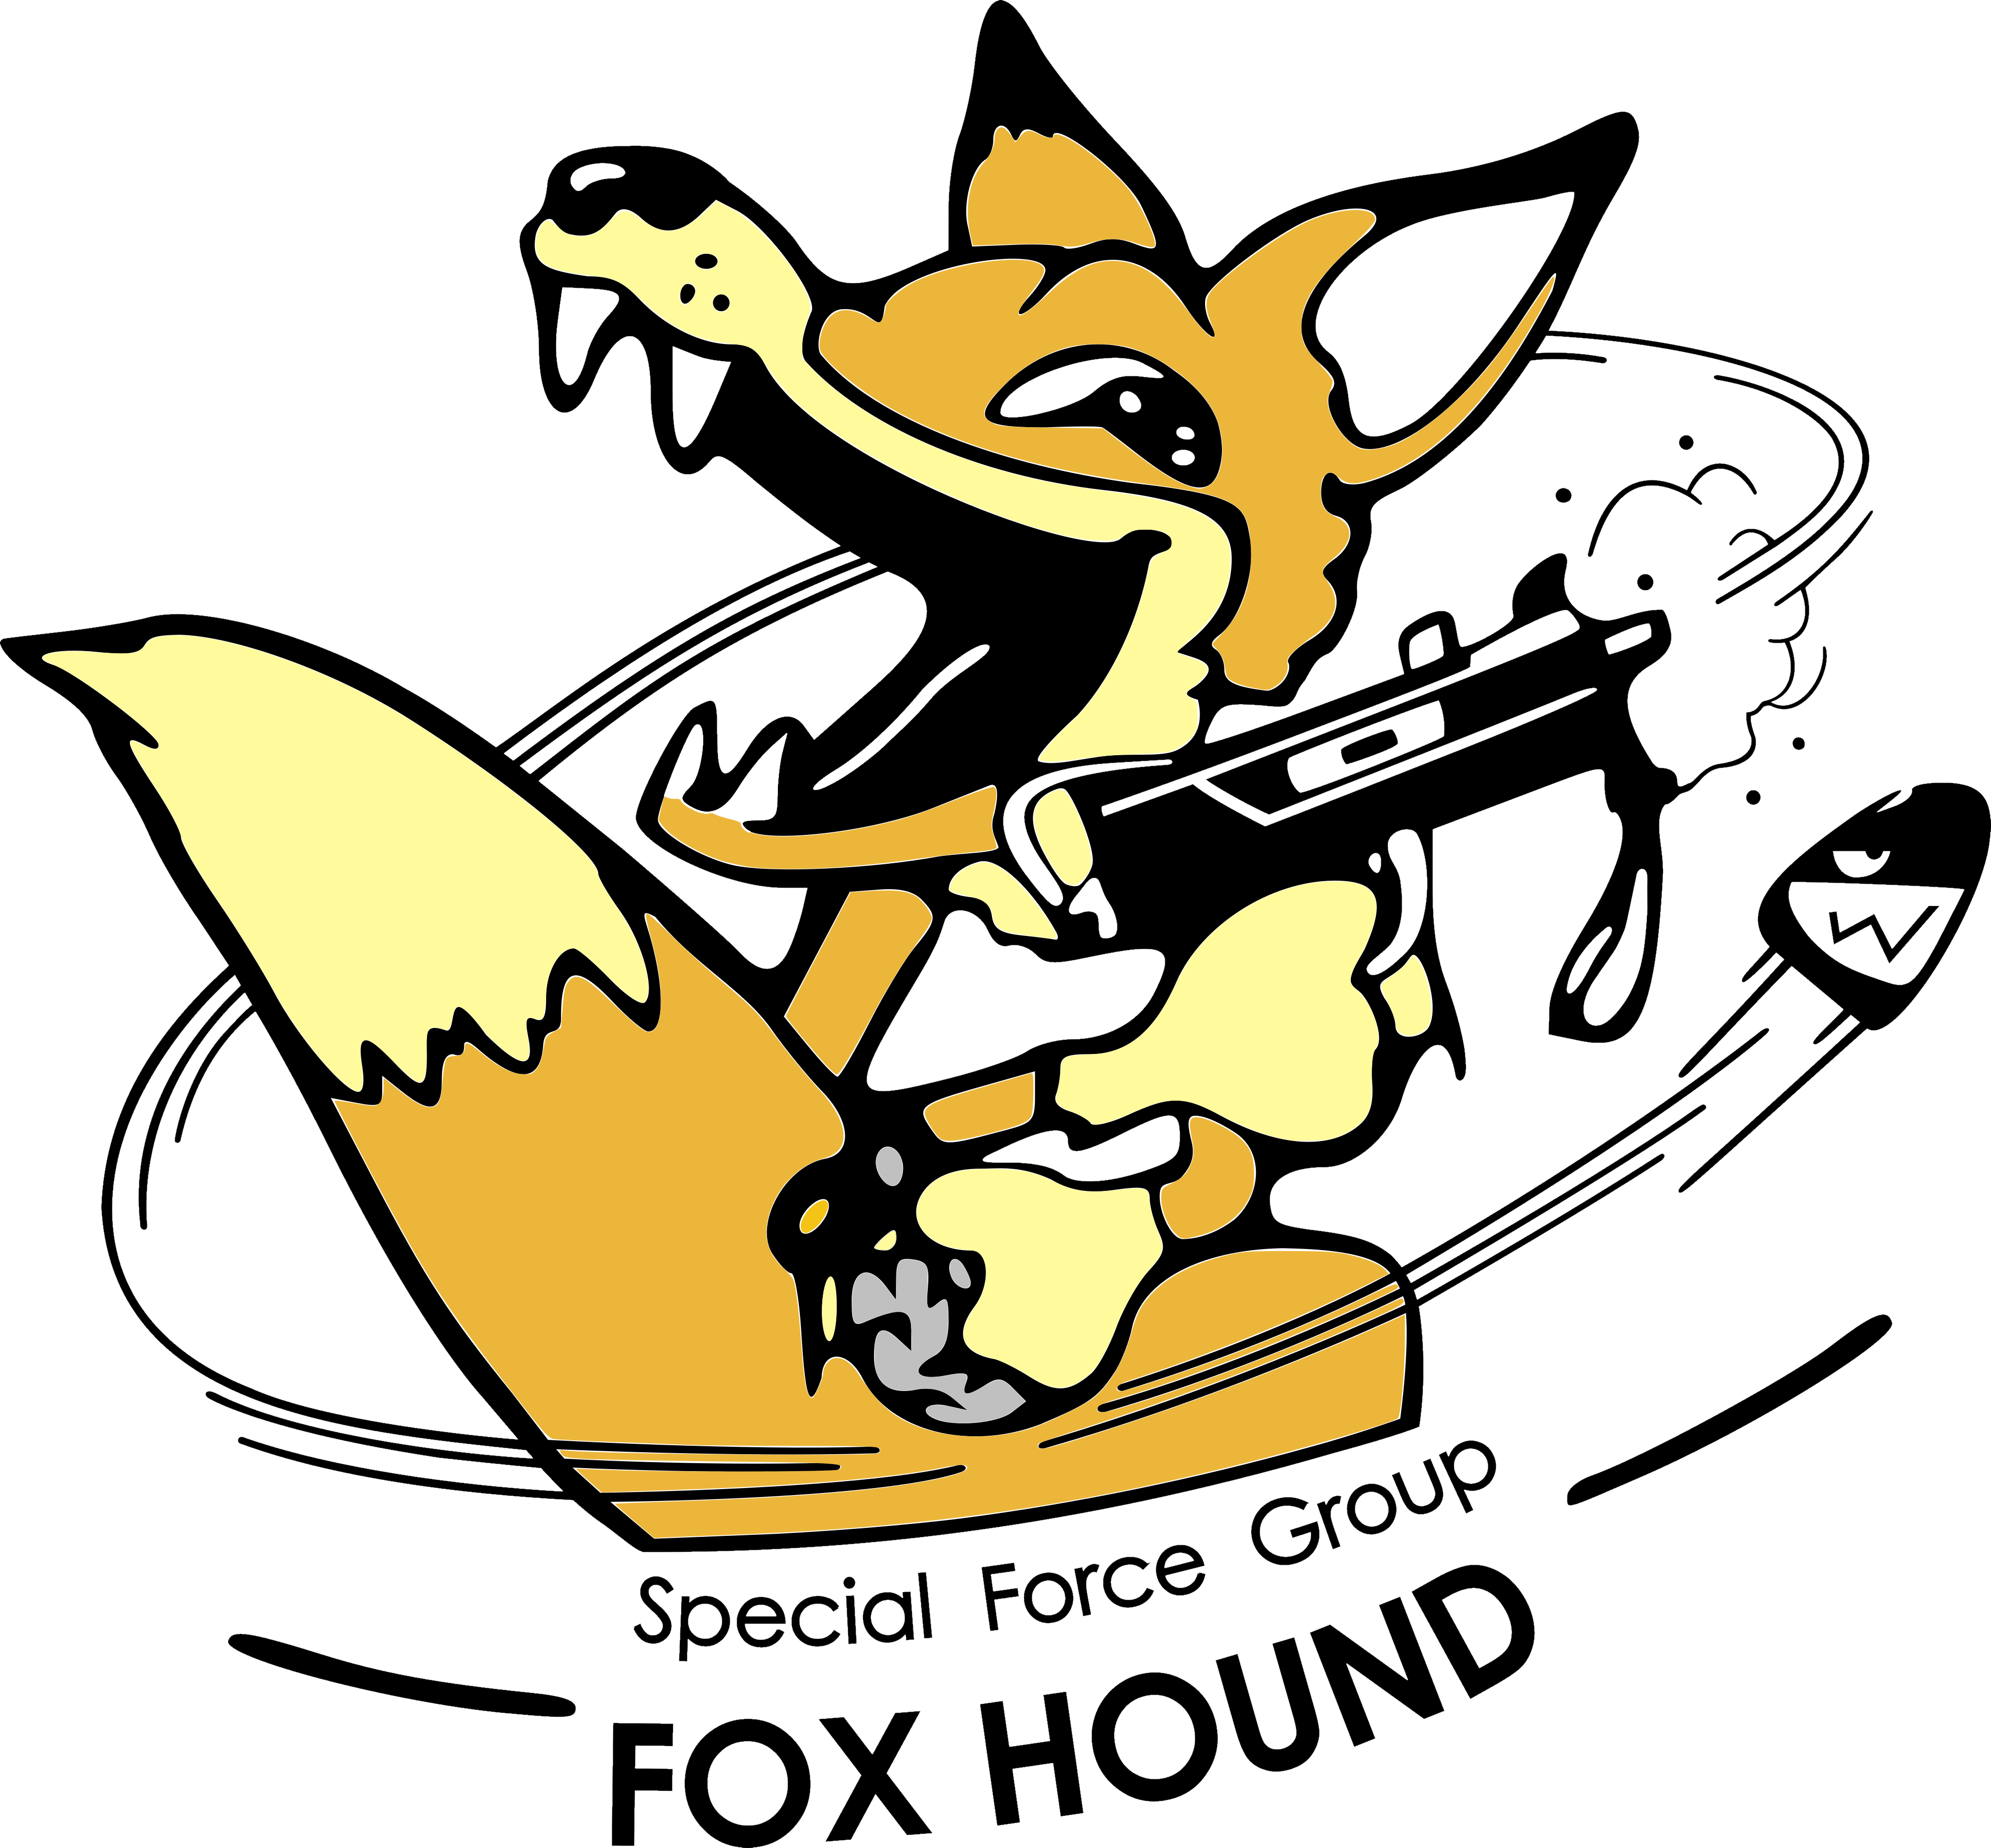 Foxhound Logo - Download within] Created a vector for the old 90's Foxhound logo ...